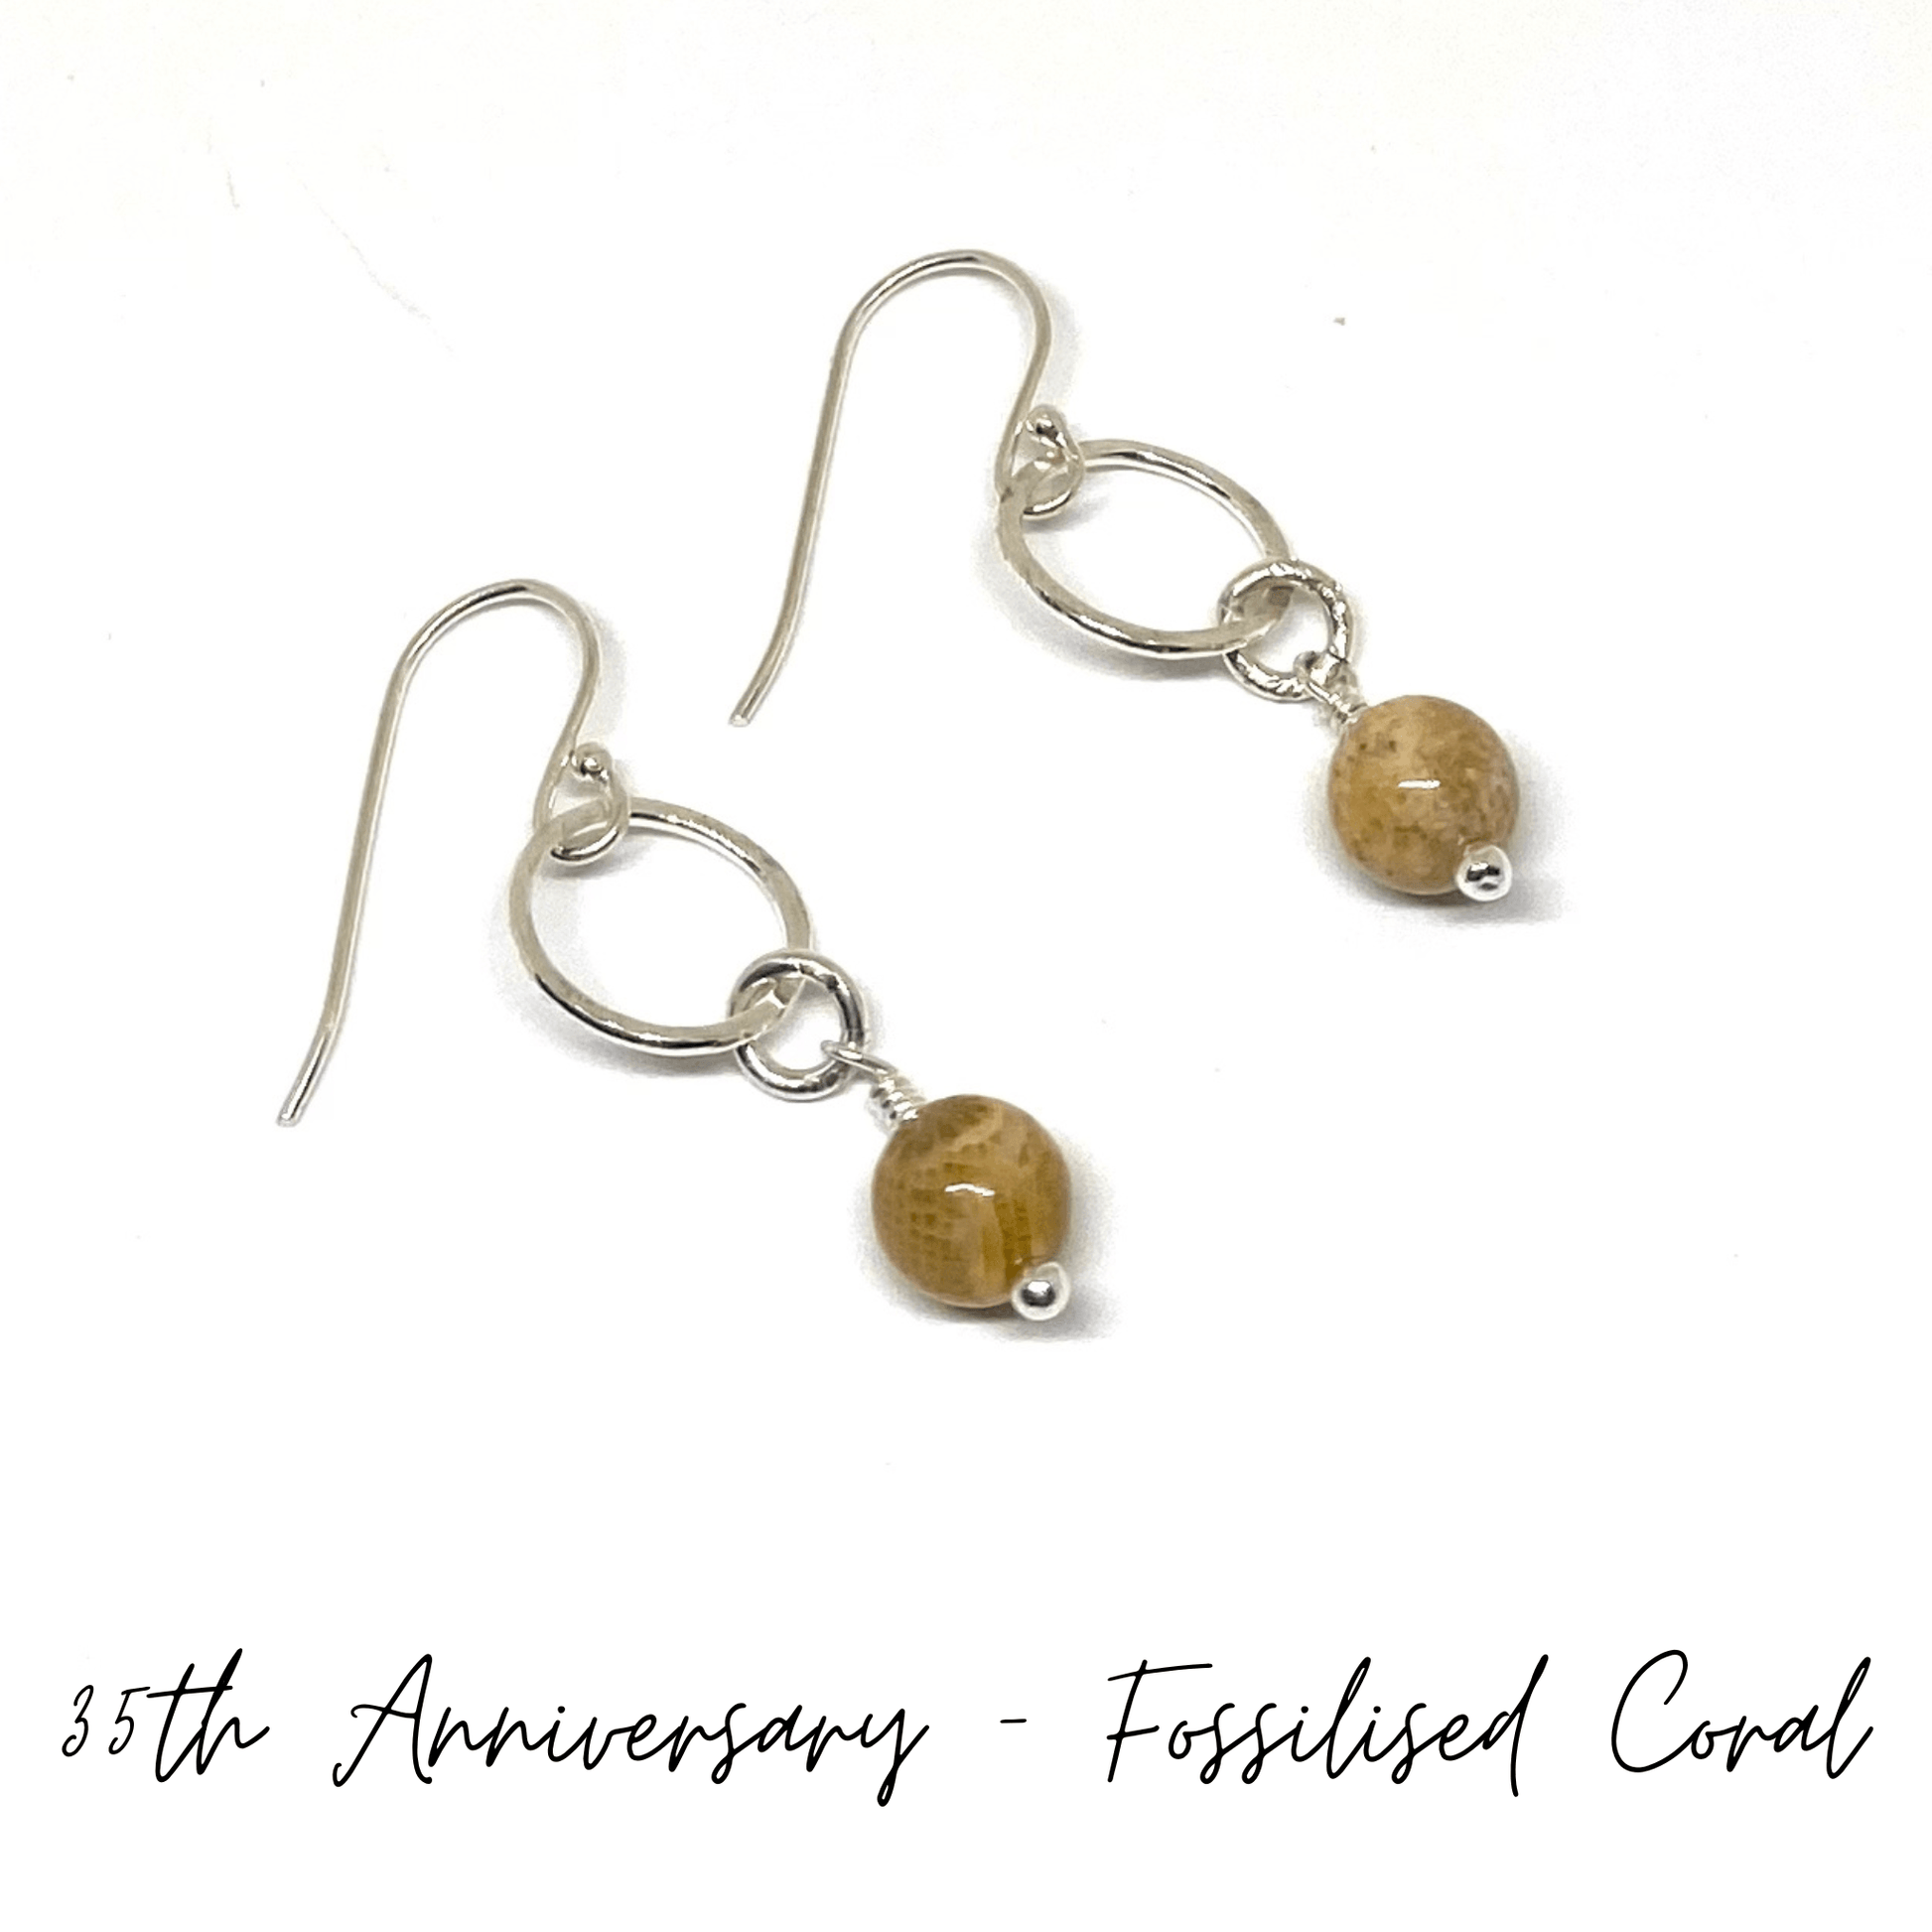 35th Anniversary Earrings | Fossilised Coral | Sterling silver | 35th wedding anniversary gift - RACHEL SHRIEVES DESIGN